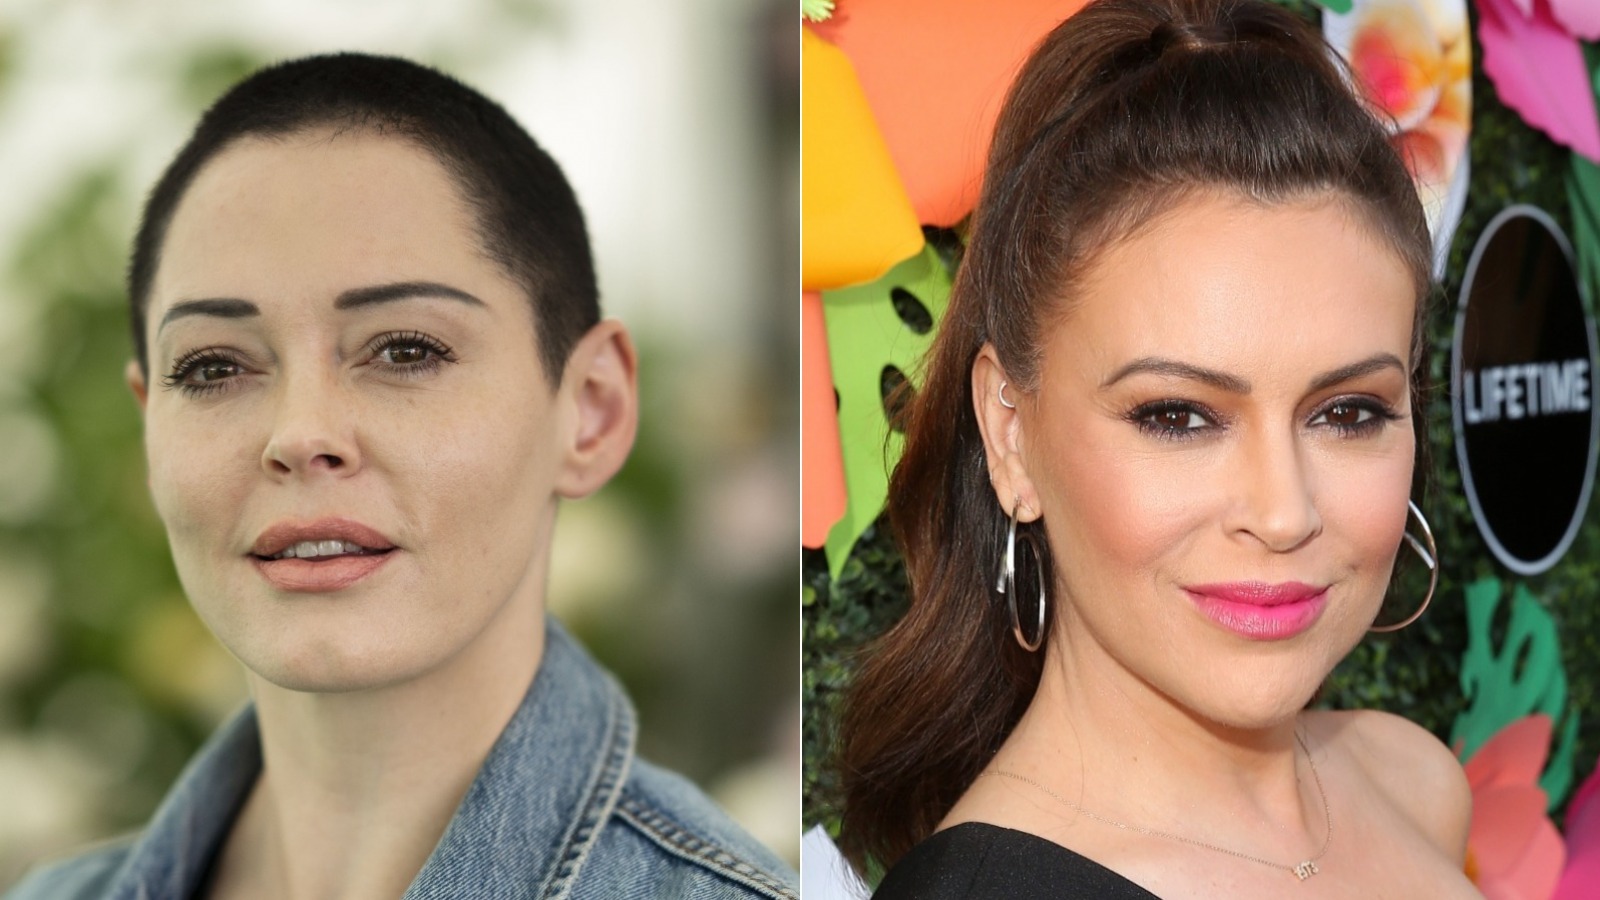 Inside the feud between rose mcgowan and alyssa milano